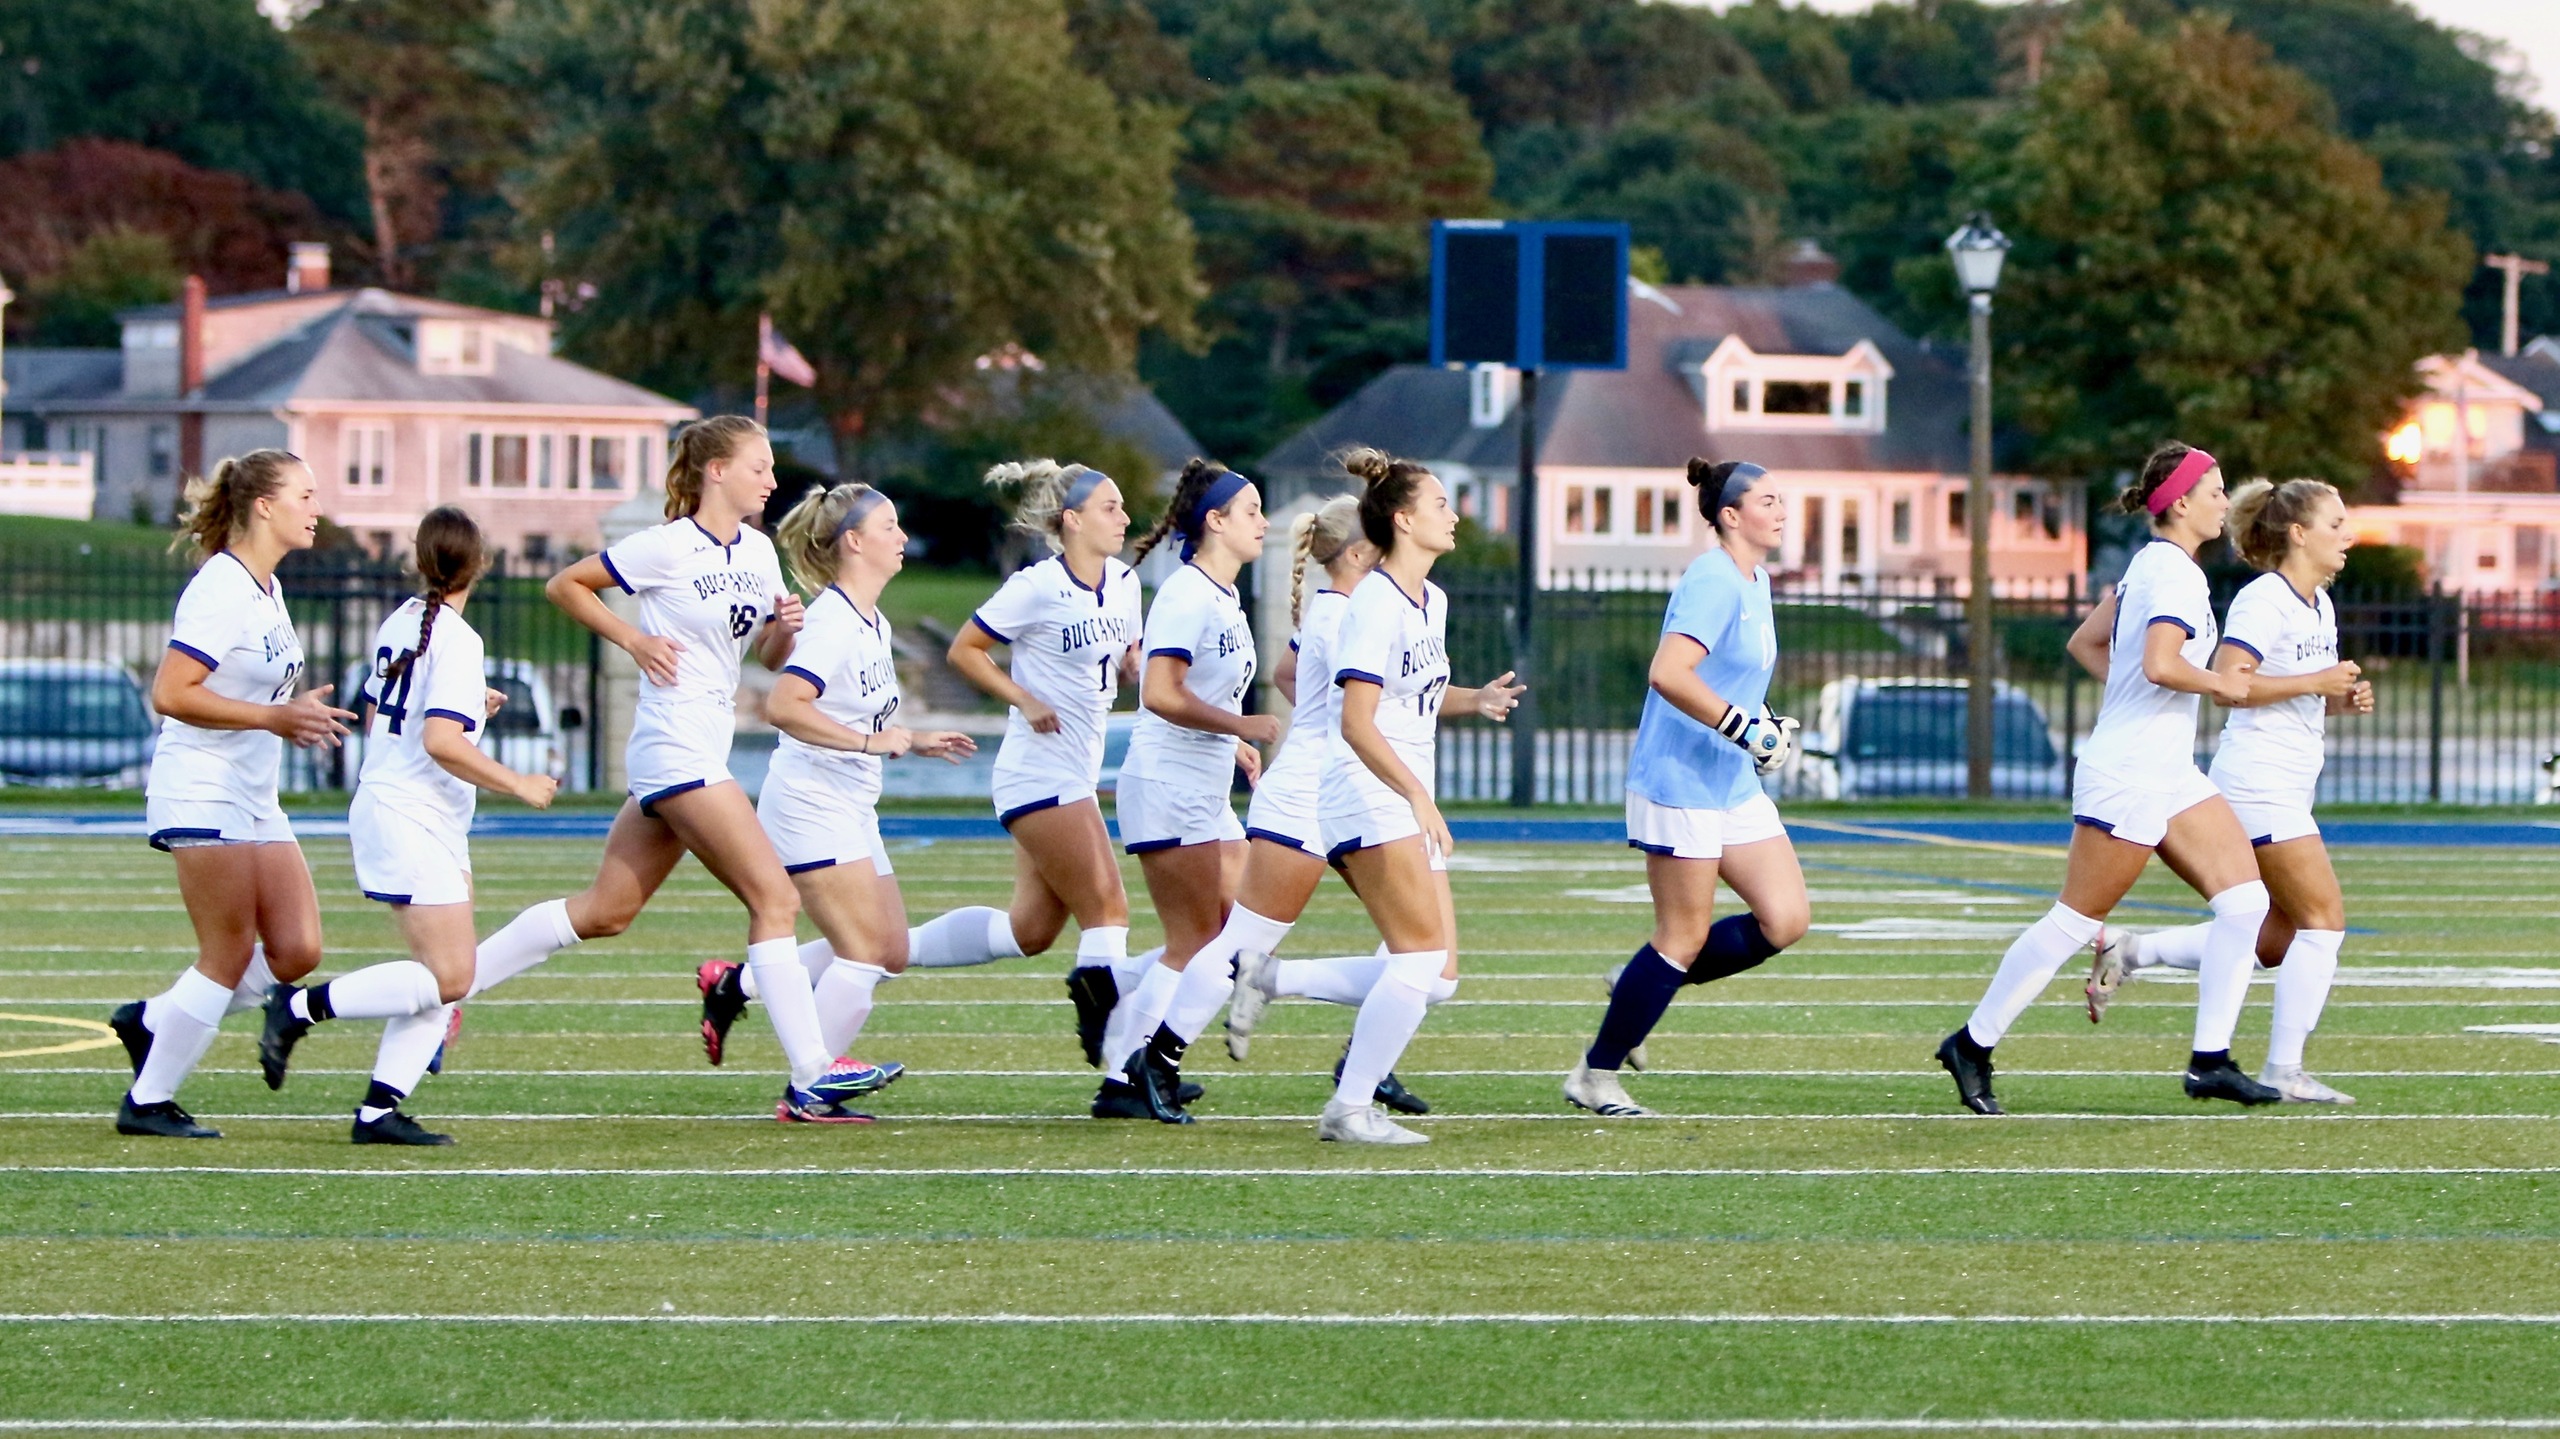 Women's Soccer: Bucs Lose to MASCAC Leaders at Home